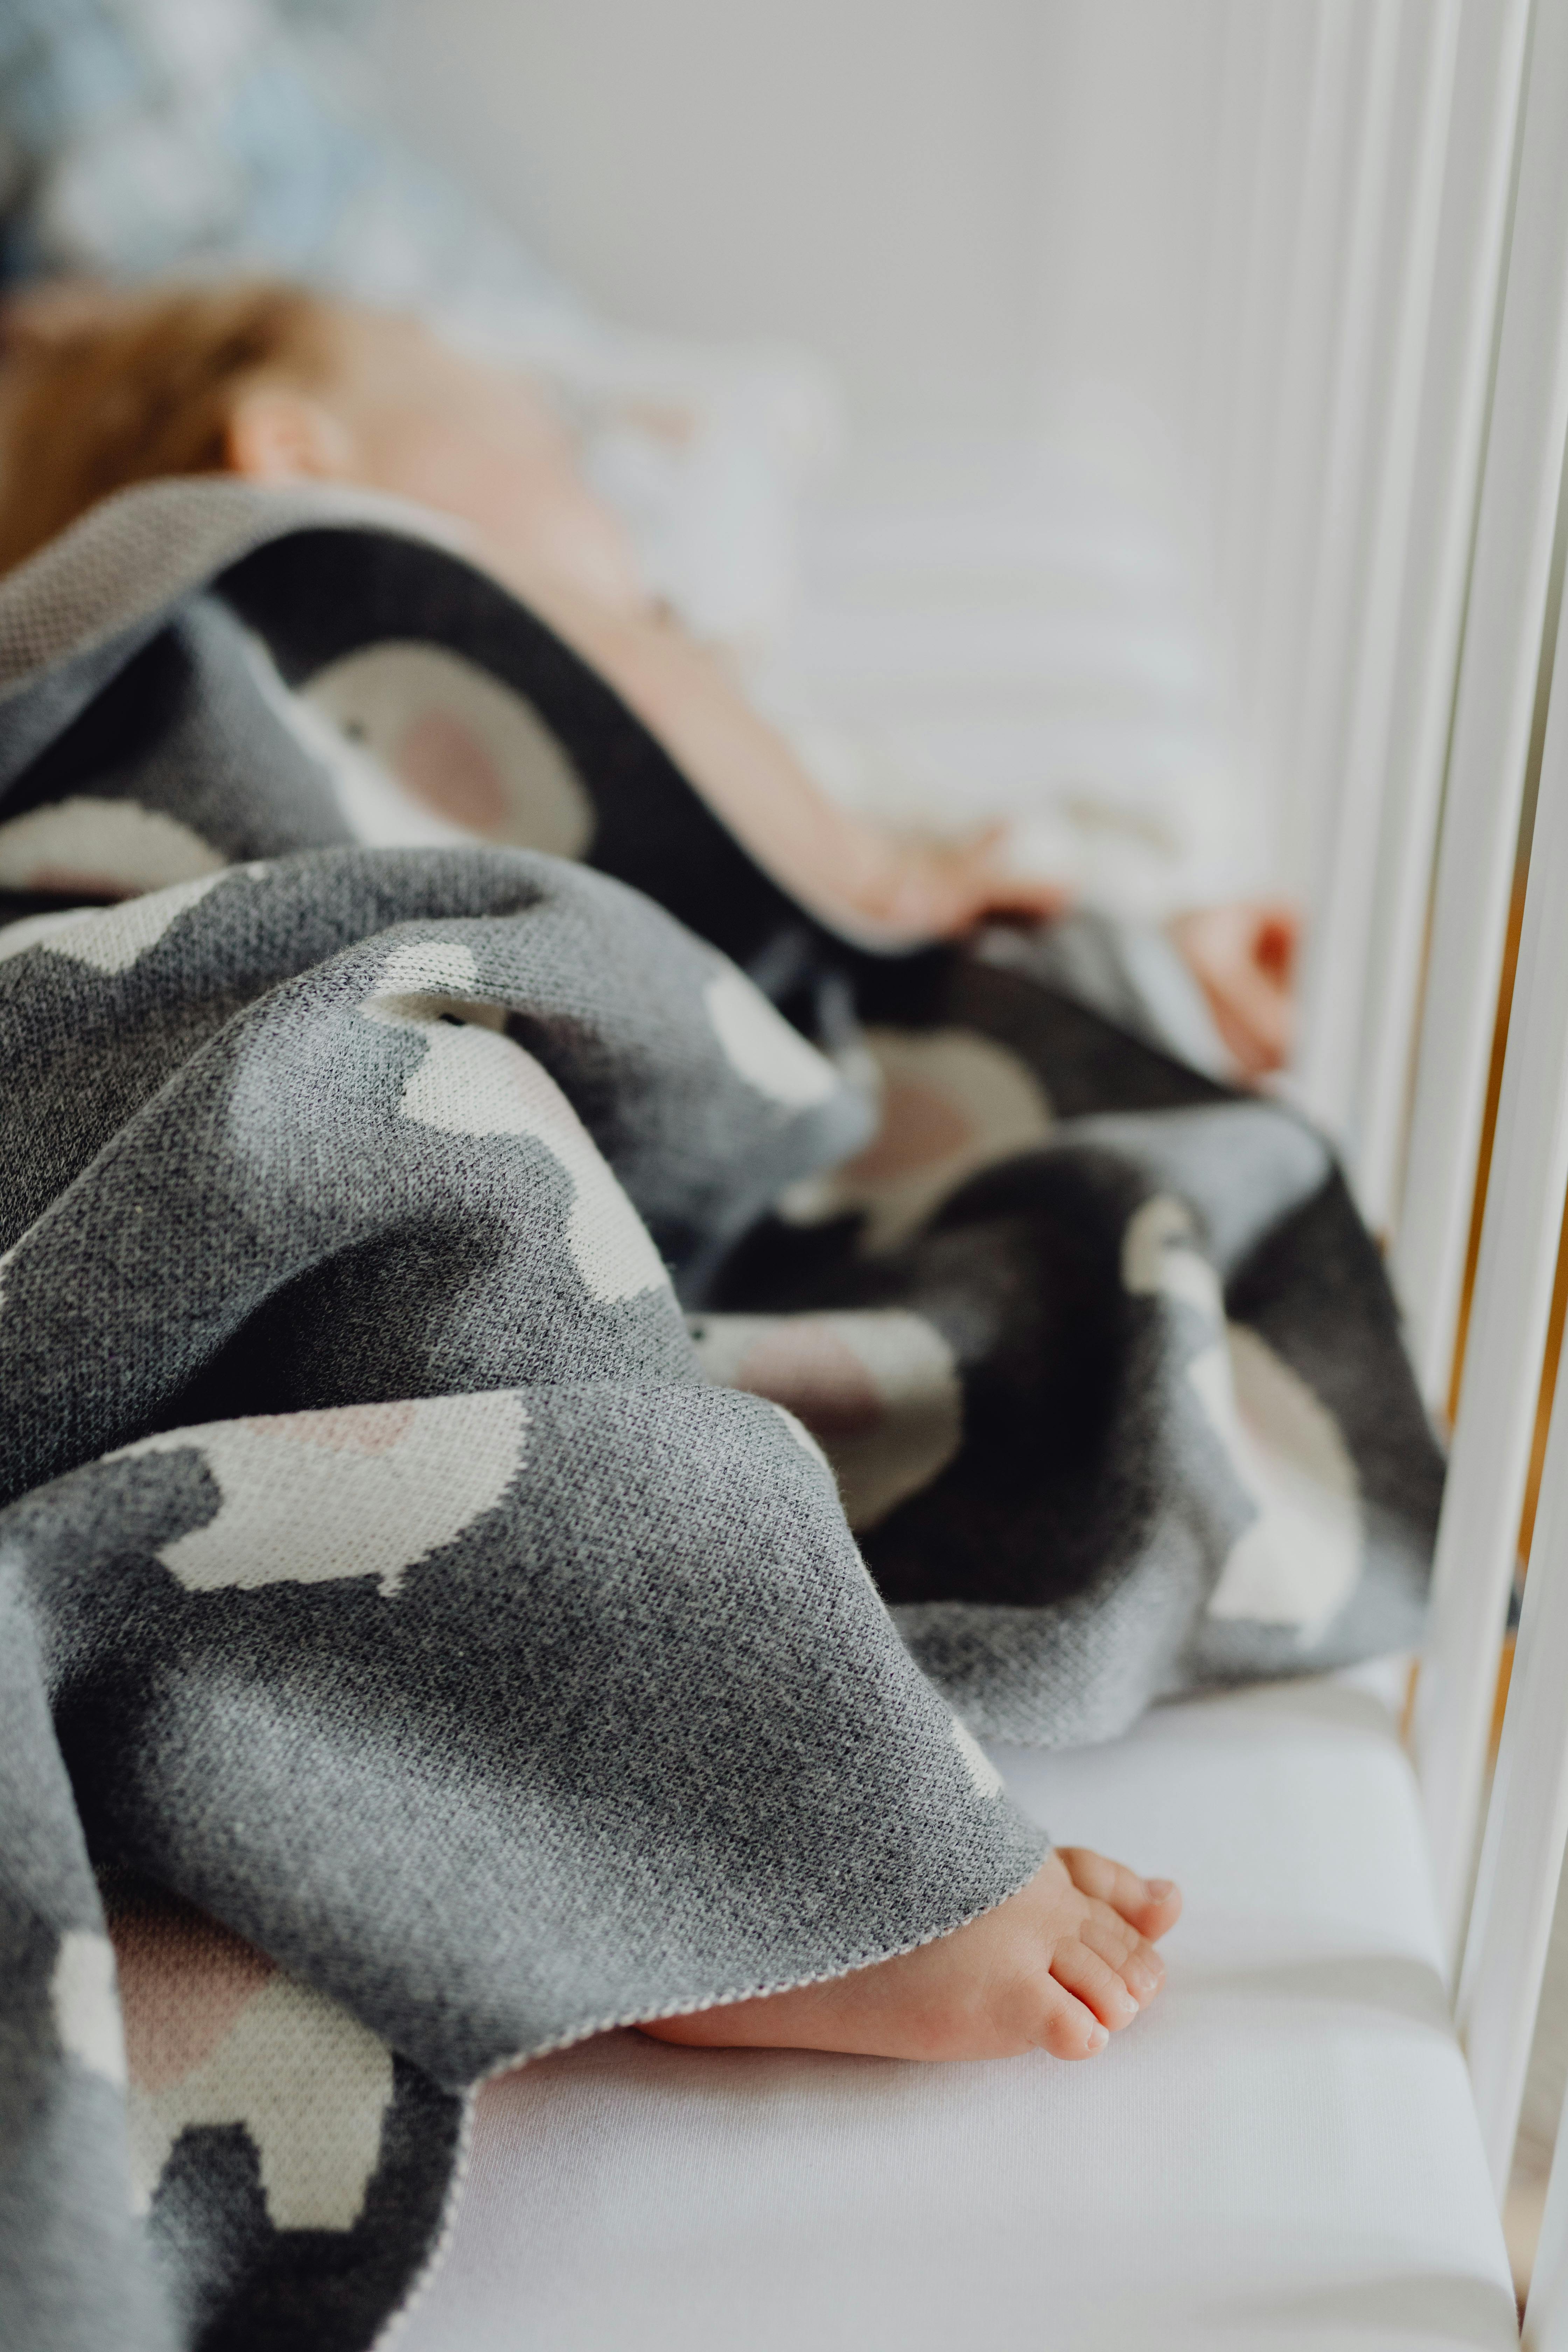 A baby sleeping in a crib with a blanket | Source: Pexels